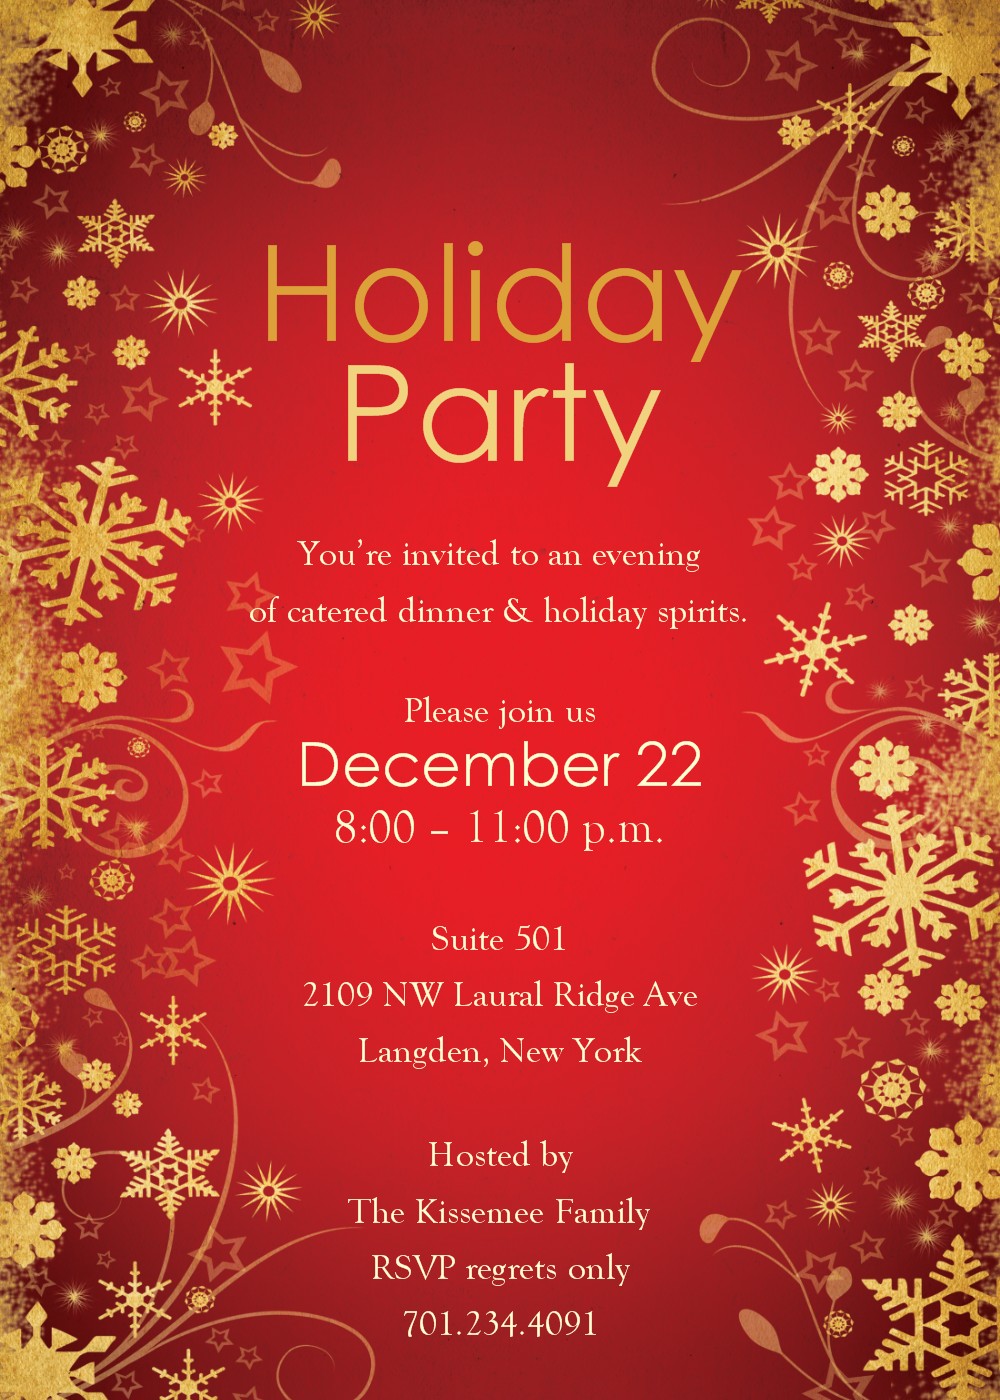 17 Holiday Party Template Images Christmas Holiday Party Invitation 